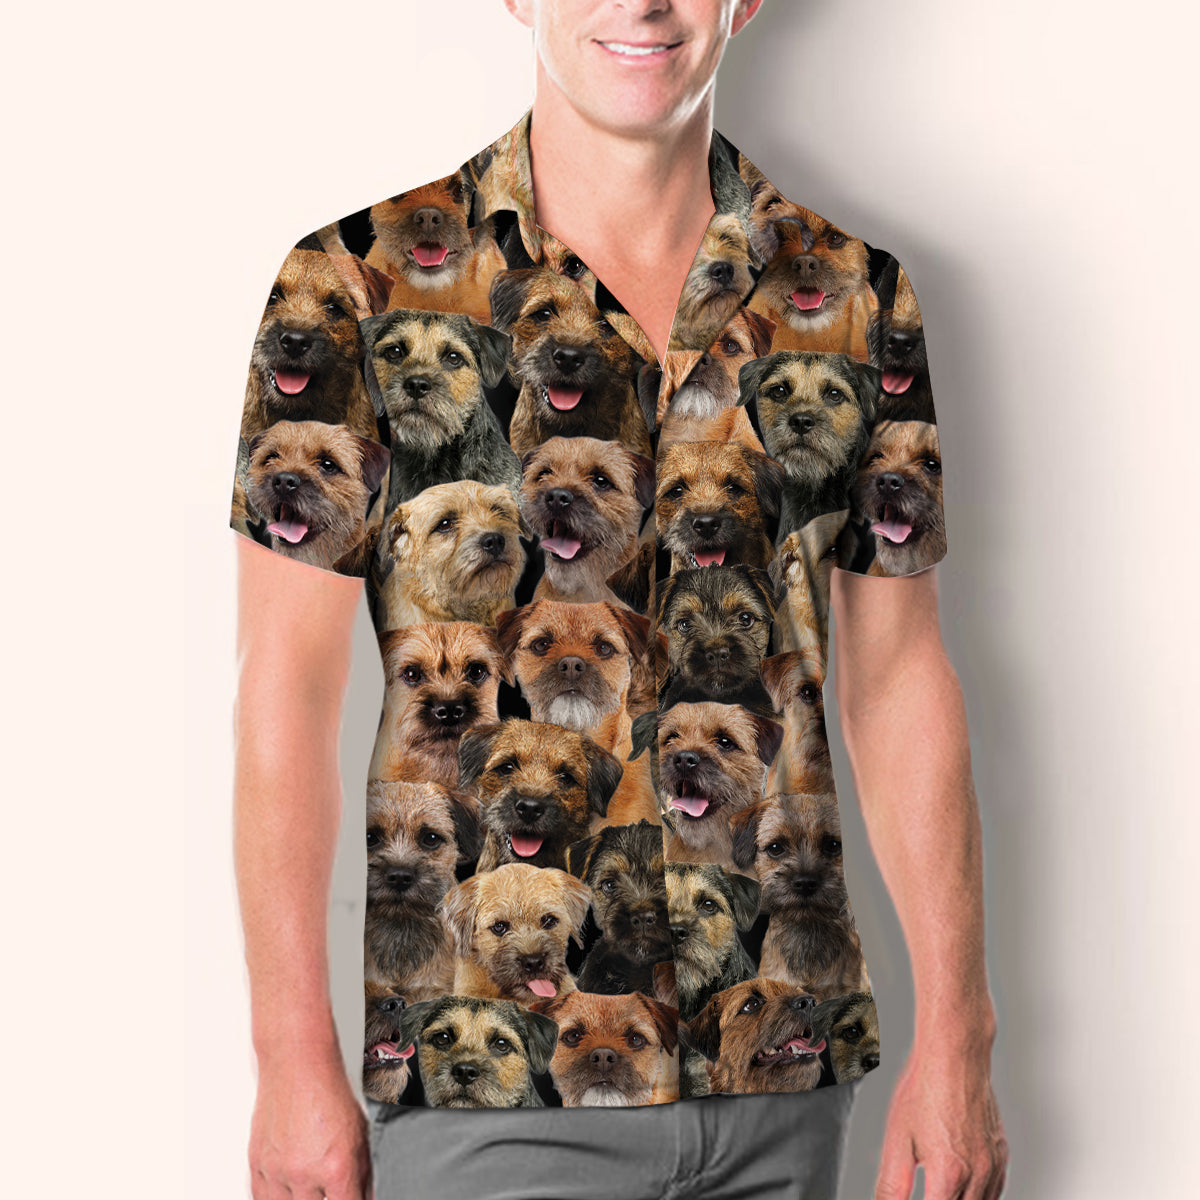 You Will Have A Bunch Of Border Terriers - Shirt V1